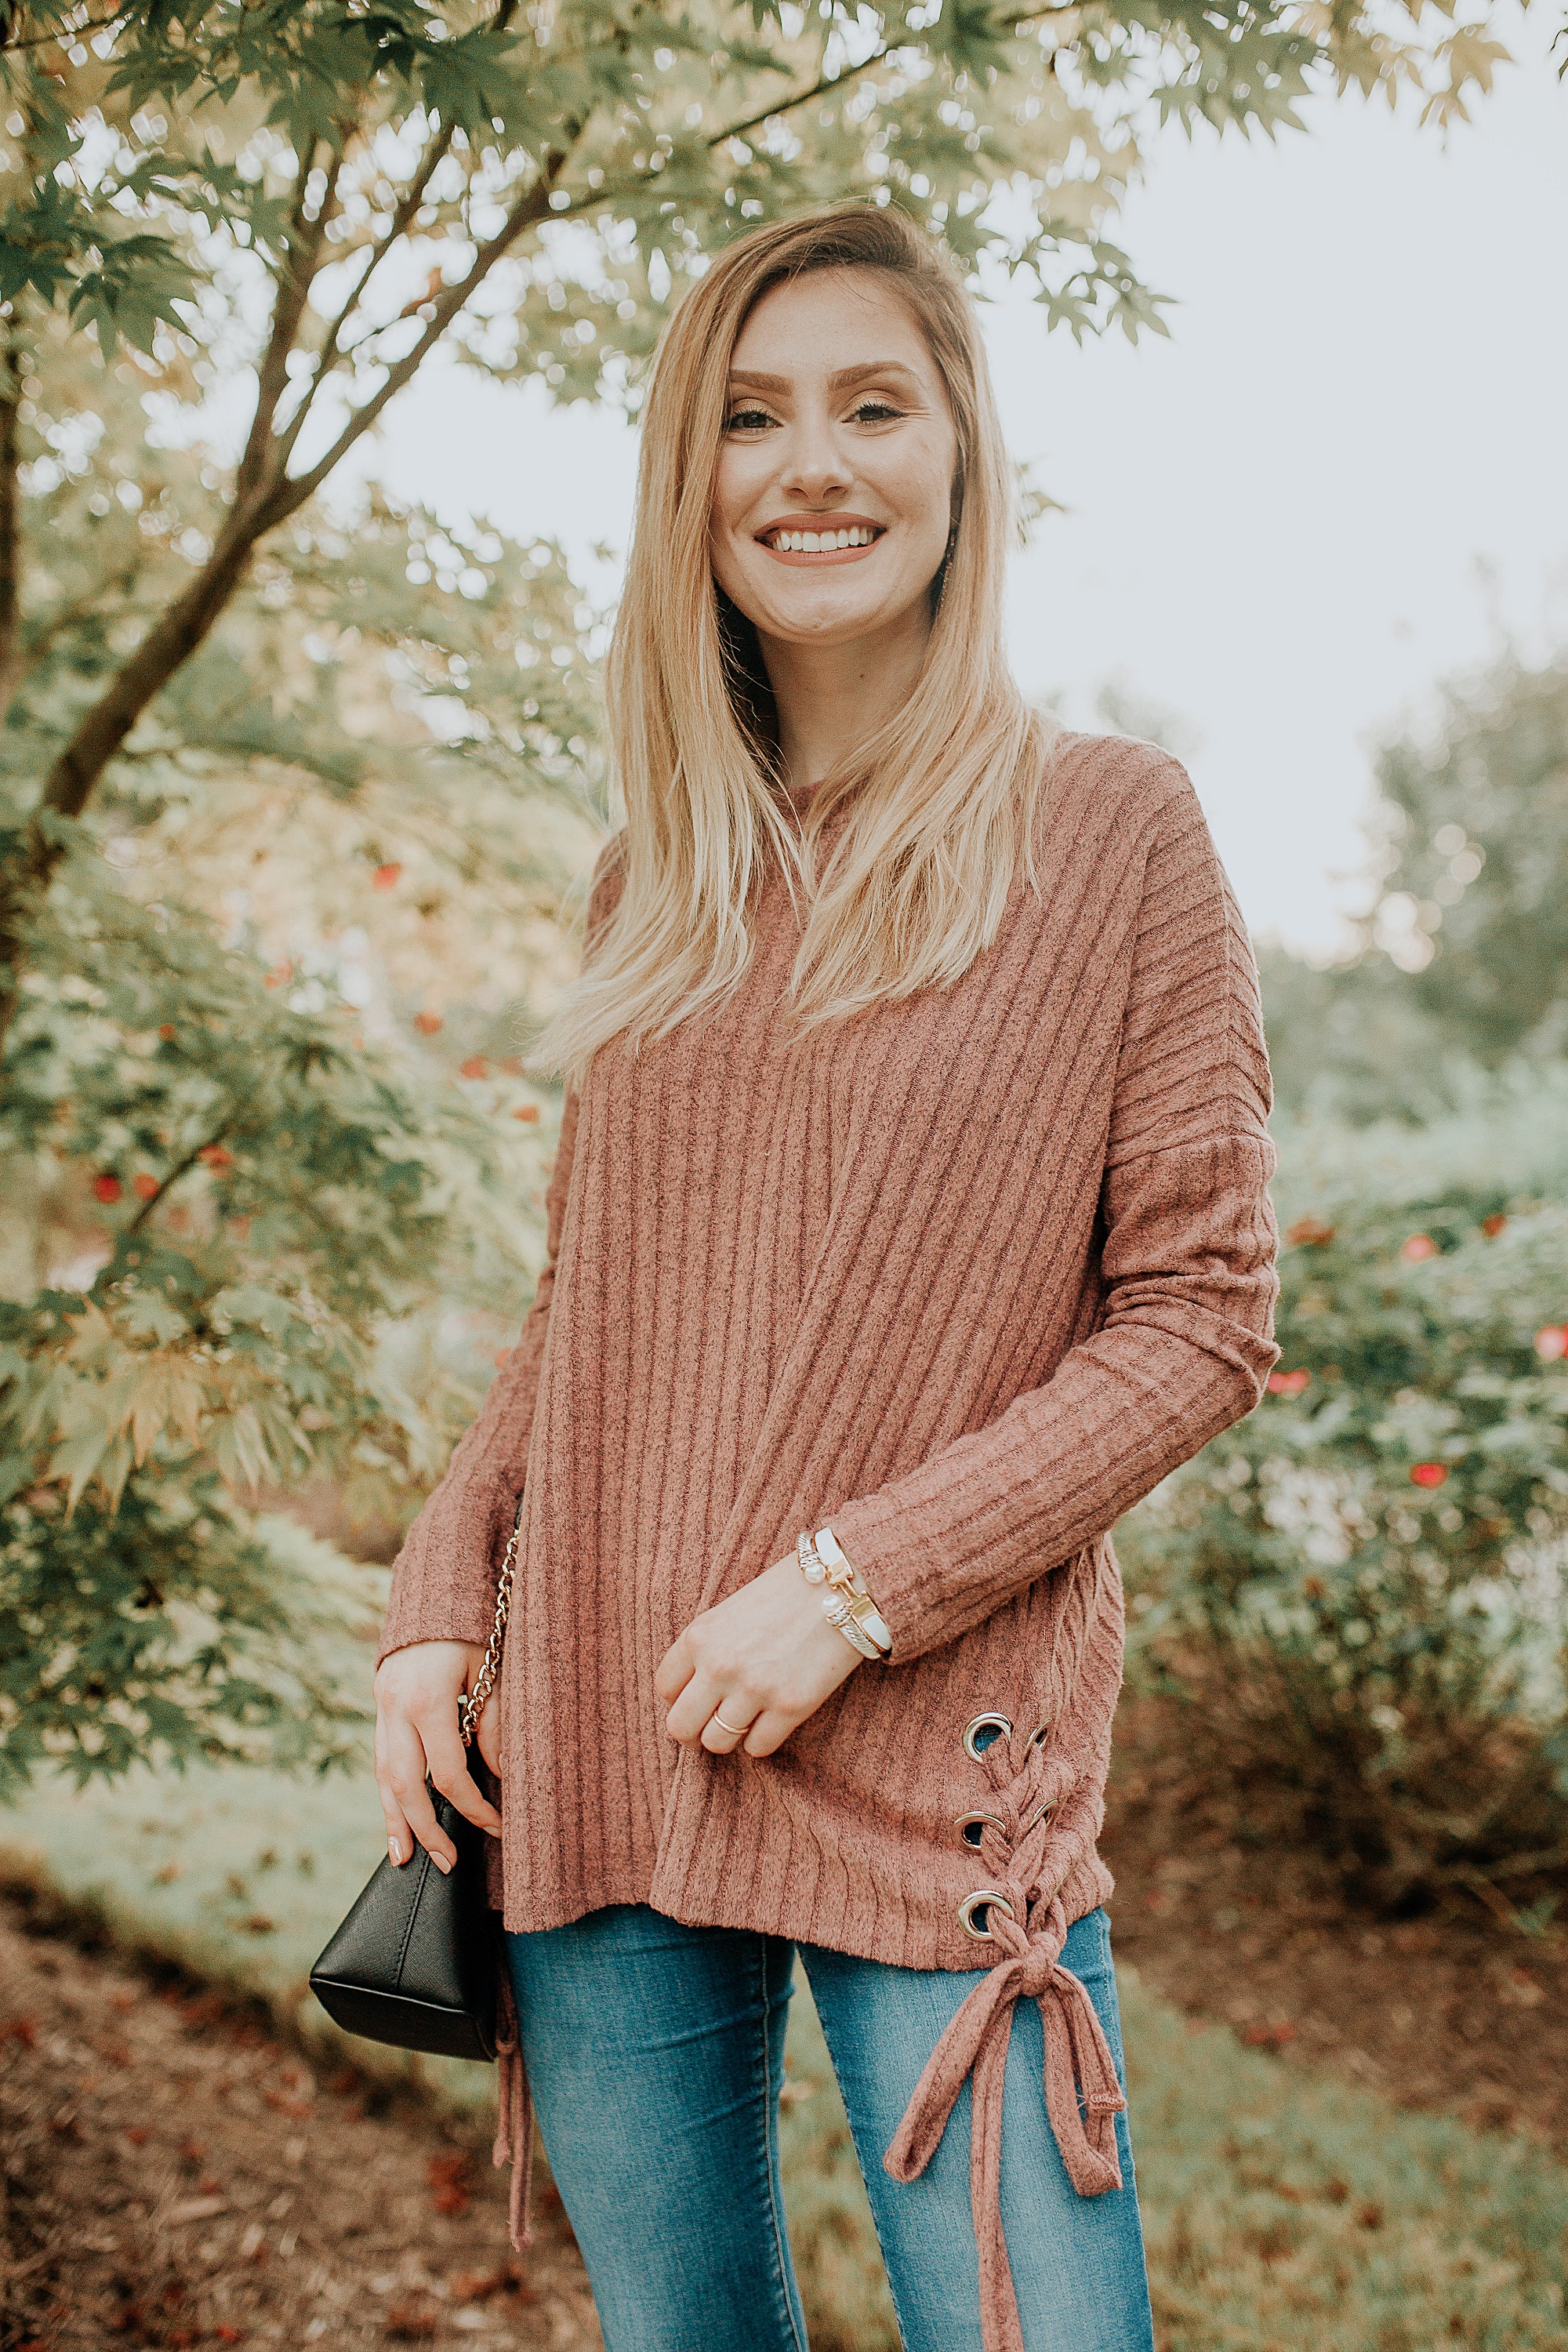 Trendy Women's Sweaters 2018 | Fall & Winter Sweaters Under $100 by North Carolina fashion and lifestyle blogger Jessica Linn